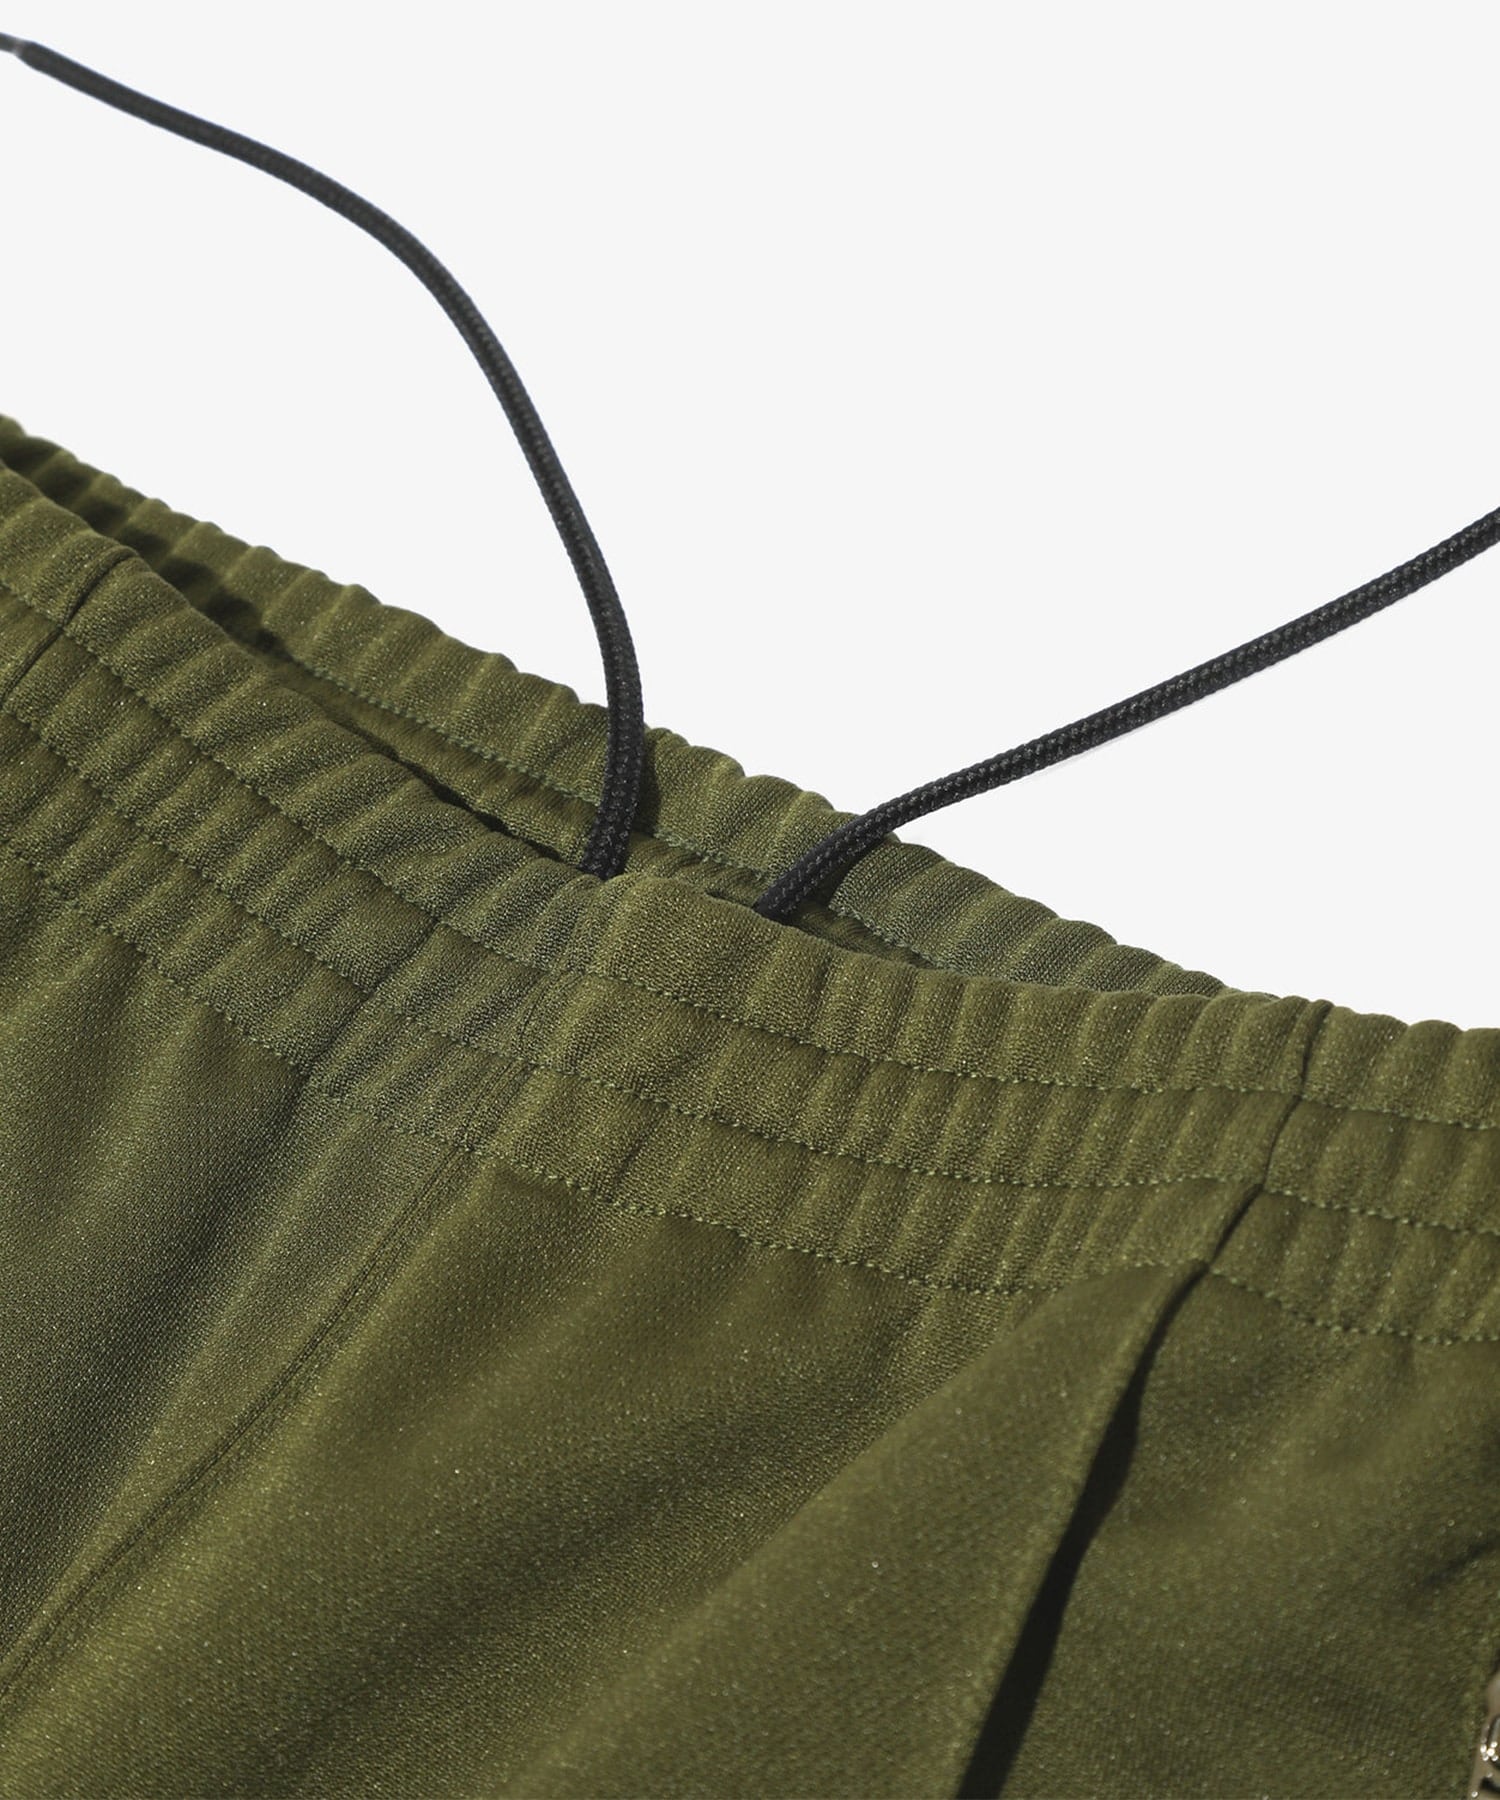 TRACK PANT - POLY SMOOTH NEEDLES